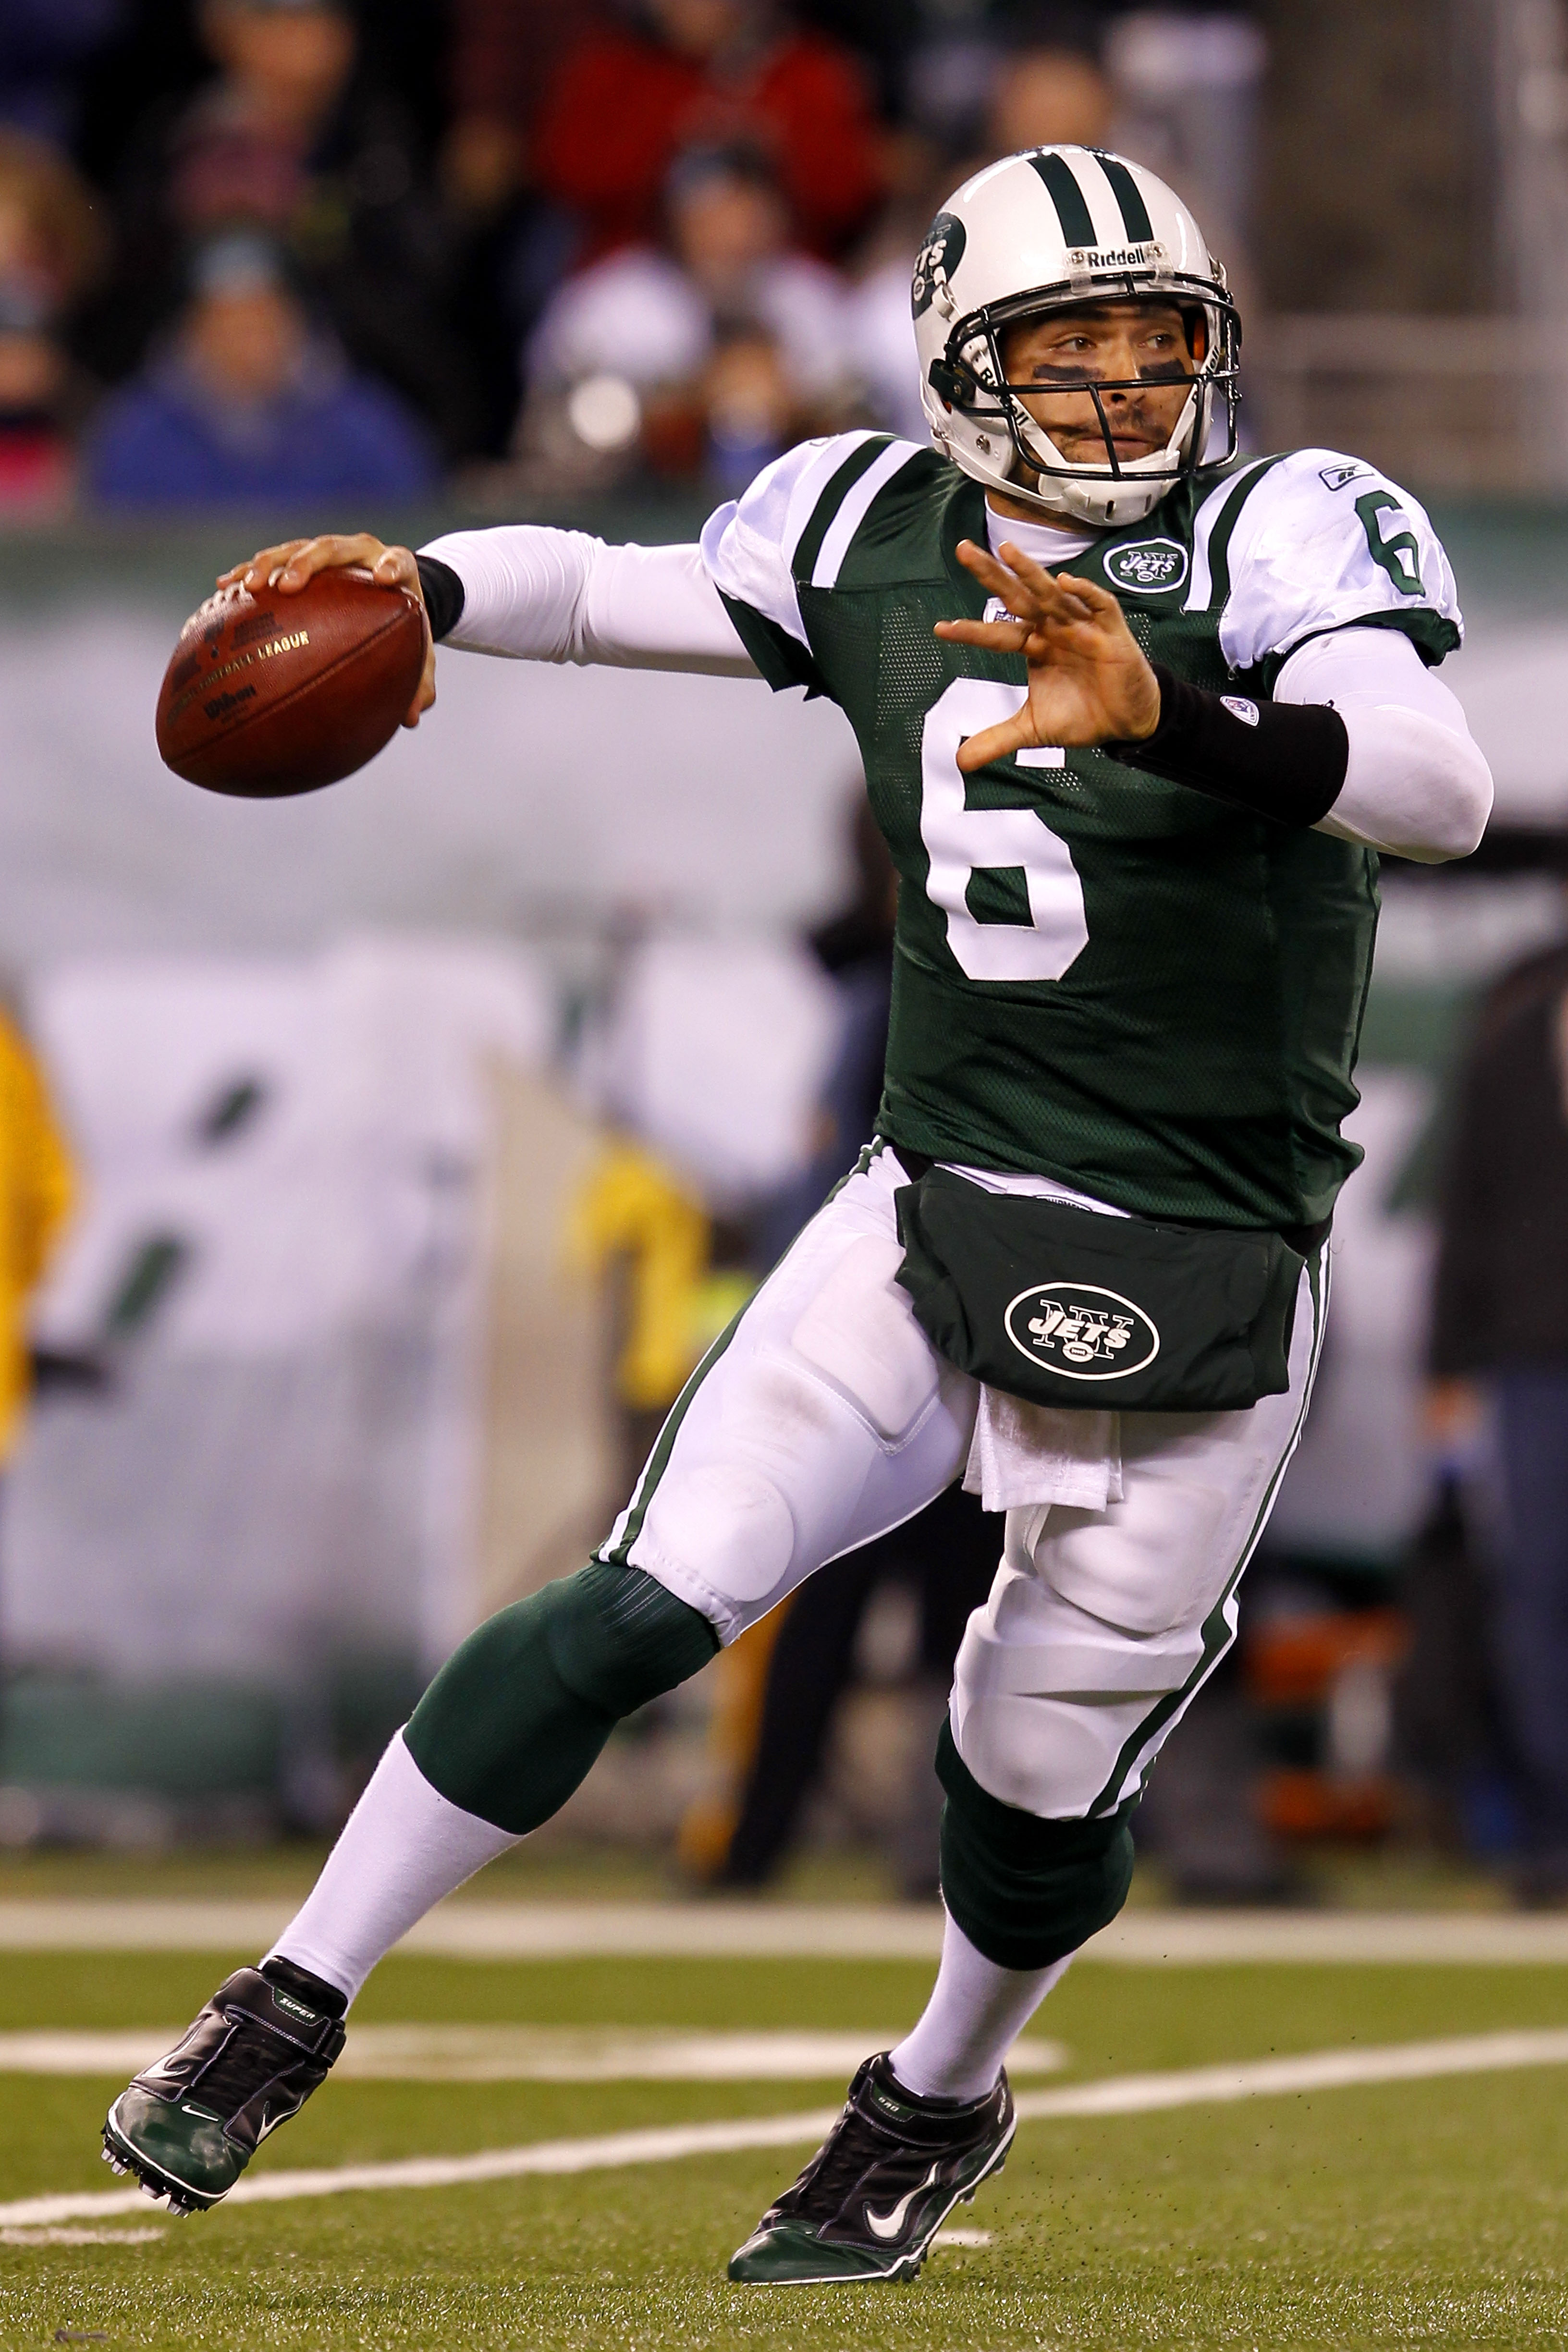 EAST RUTHERFORD, NJ - NOVEMBER 25:  Quarterback Mark Sanchez #6 of the New York Jets looks to throw a pass against the Cincinnati Bengals at New Meadowlands Stadium on November 25, 2010 in East Rutherford, New Jersey. The Jets defeated the Bengal 26-10.